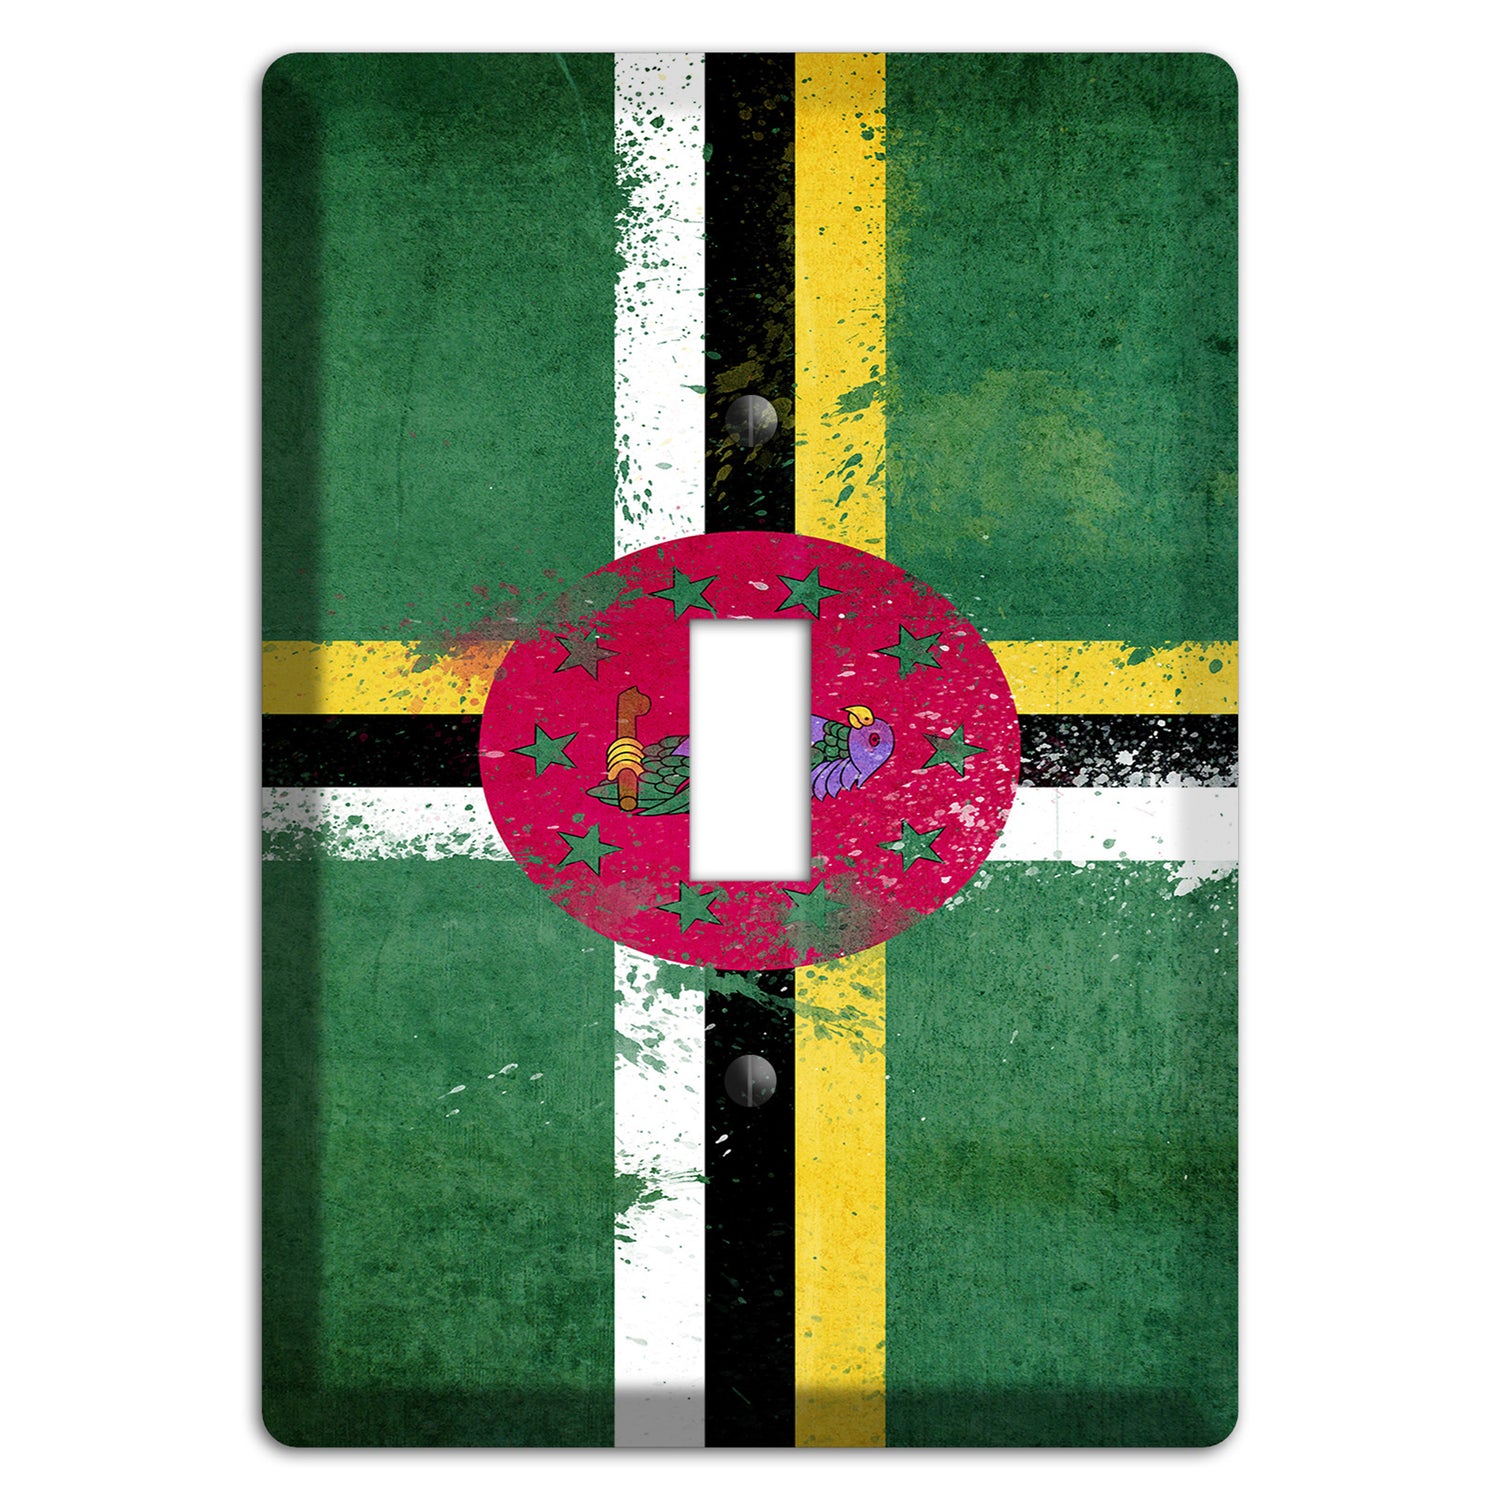 Dominica Cover Plates Cover Plates